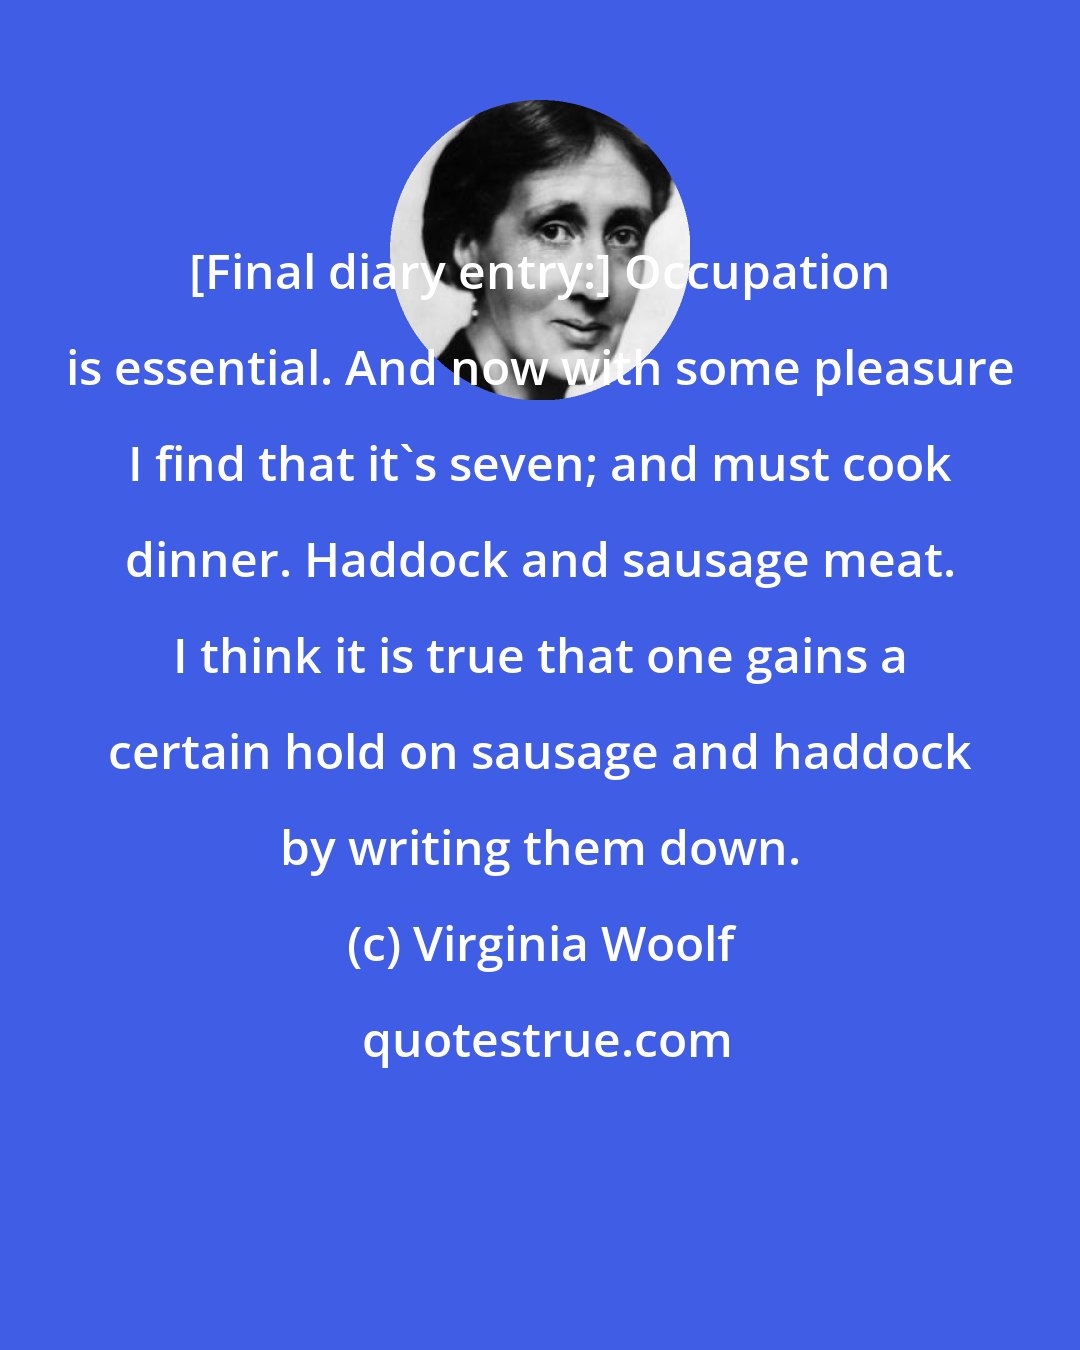 Virginia Woolf: [Final diary entry:] Occupation is essential. And now with some pleasure I find that it's seven; and must cook dinner. Haddock and sausage meat. I think it is true that one gains a certain hold on sausage and haddock by writing them down.